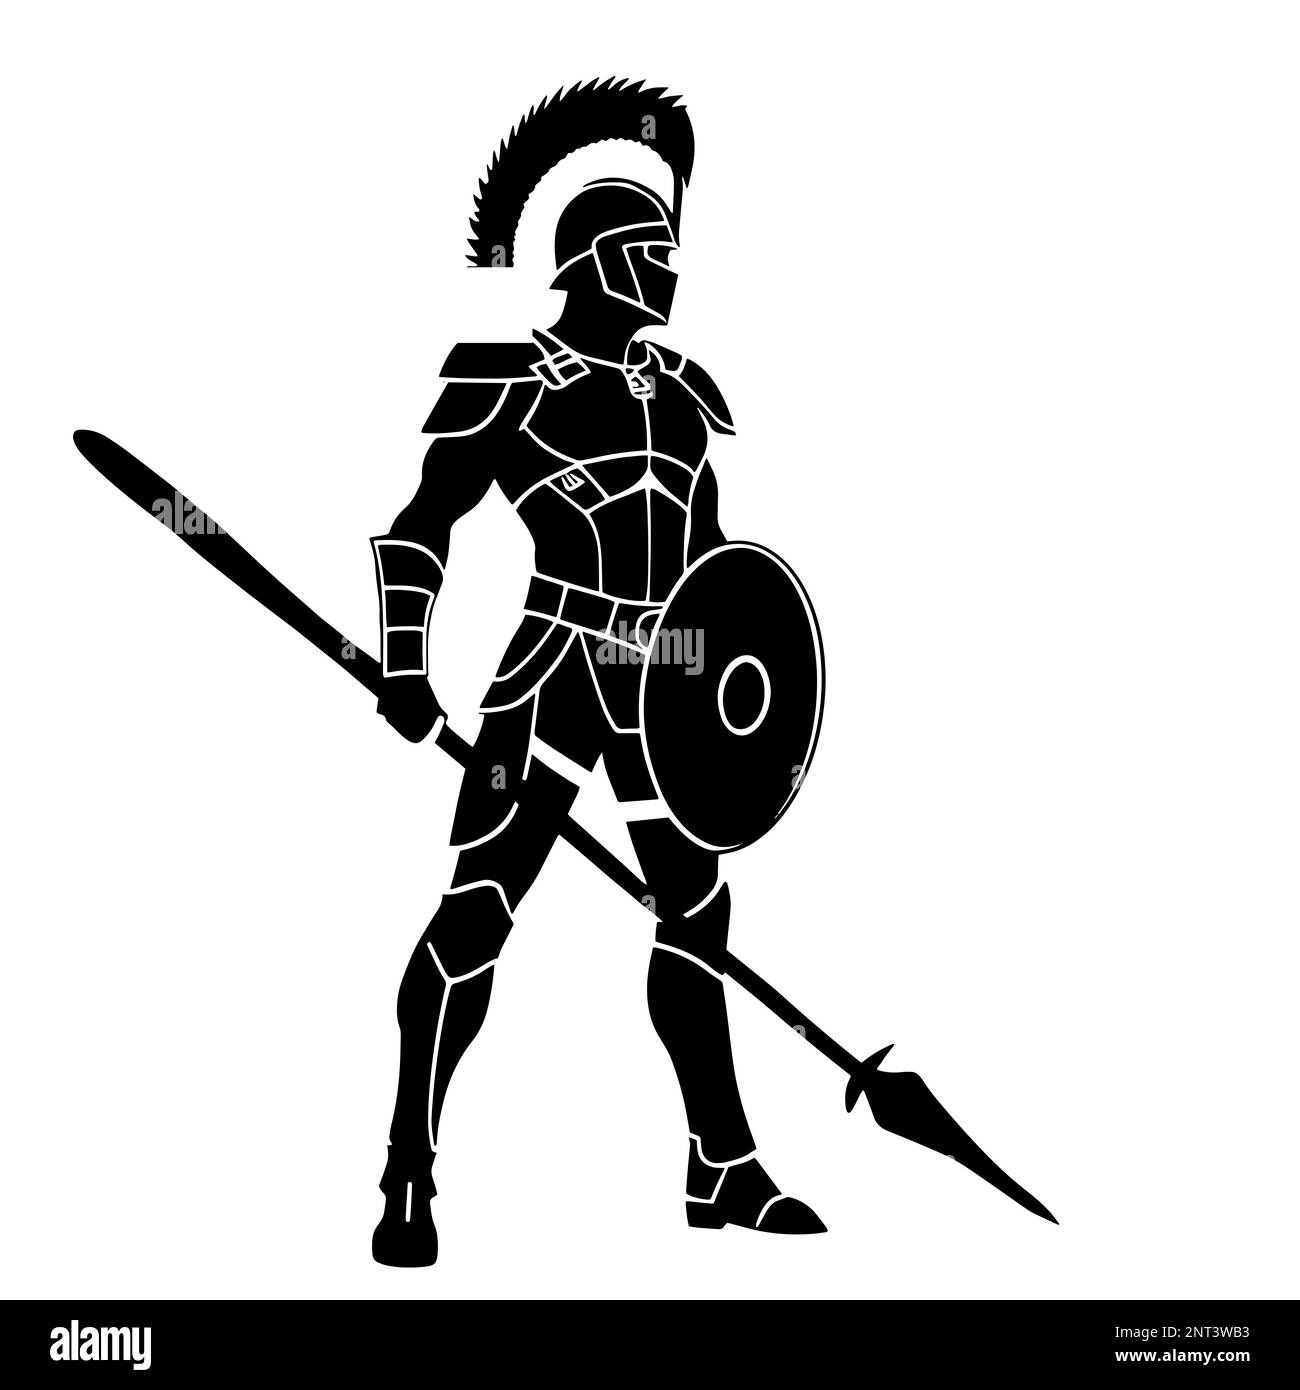 Illustration of a Spartan warrior in striking black and white monochrome style, evoking a sense of power Stock Photo